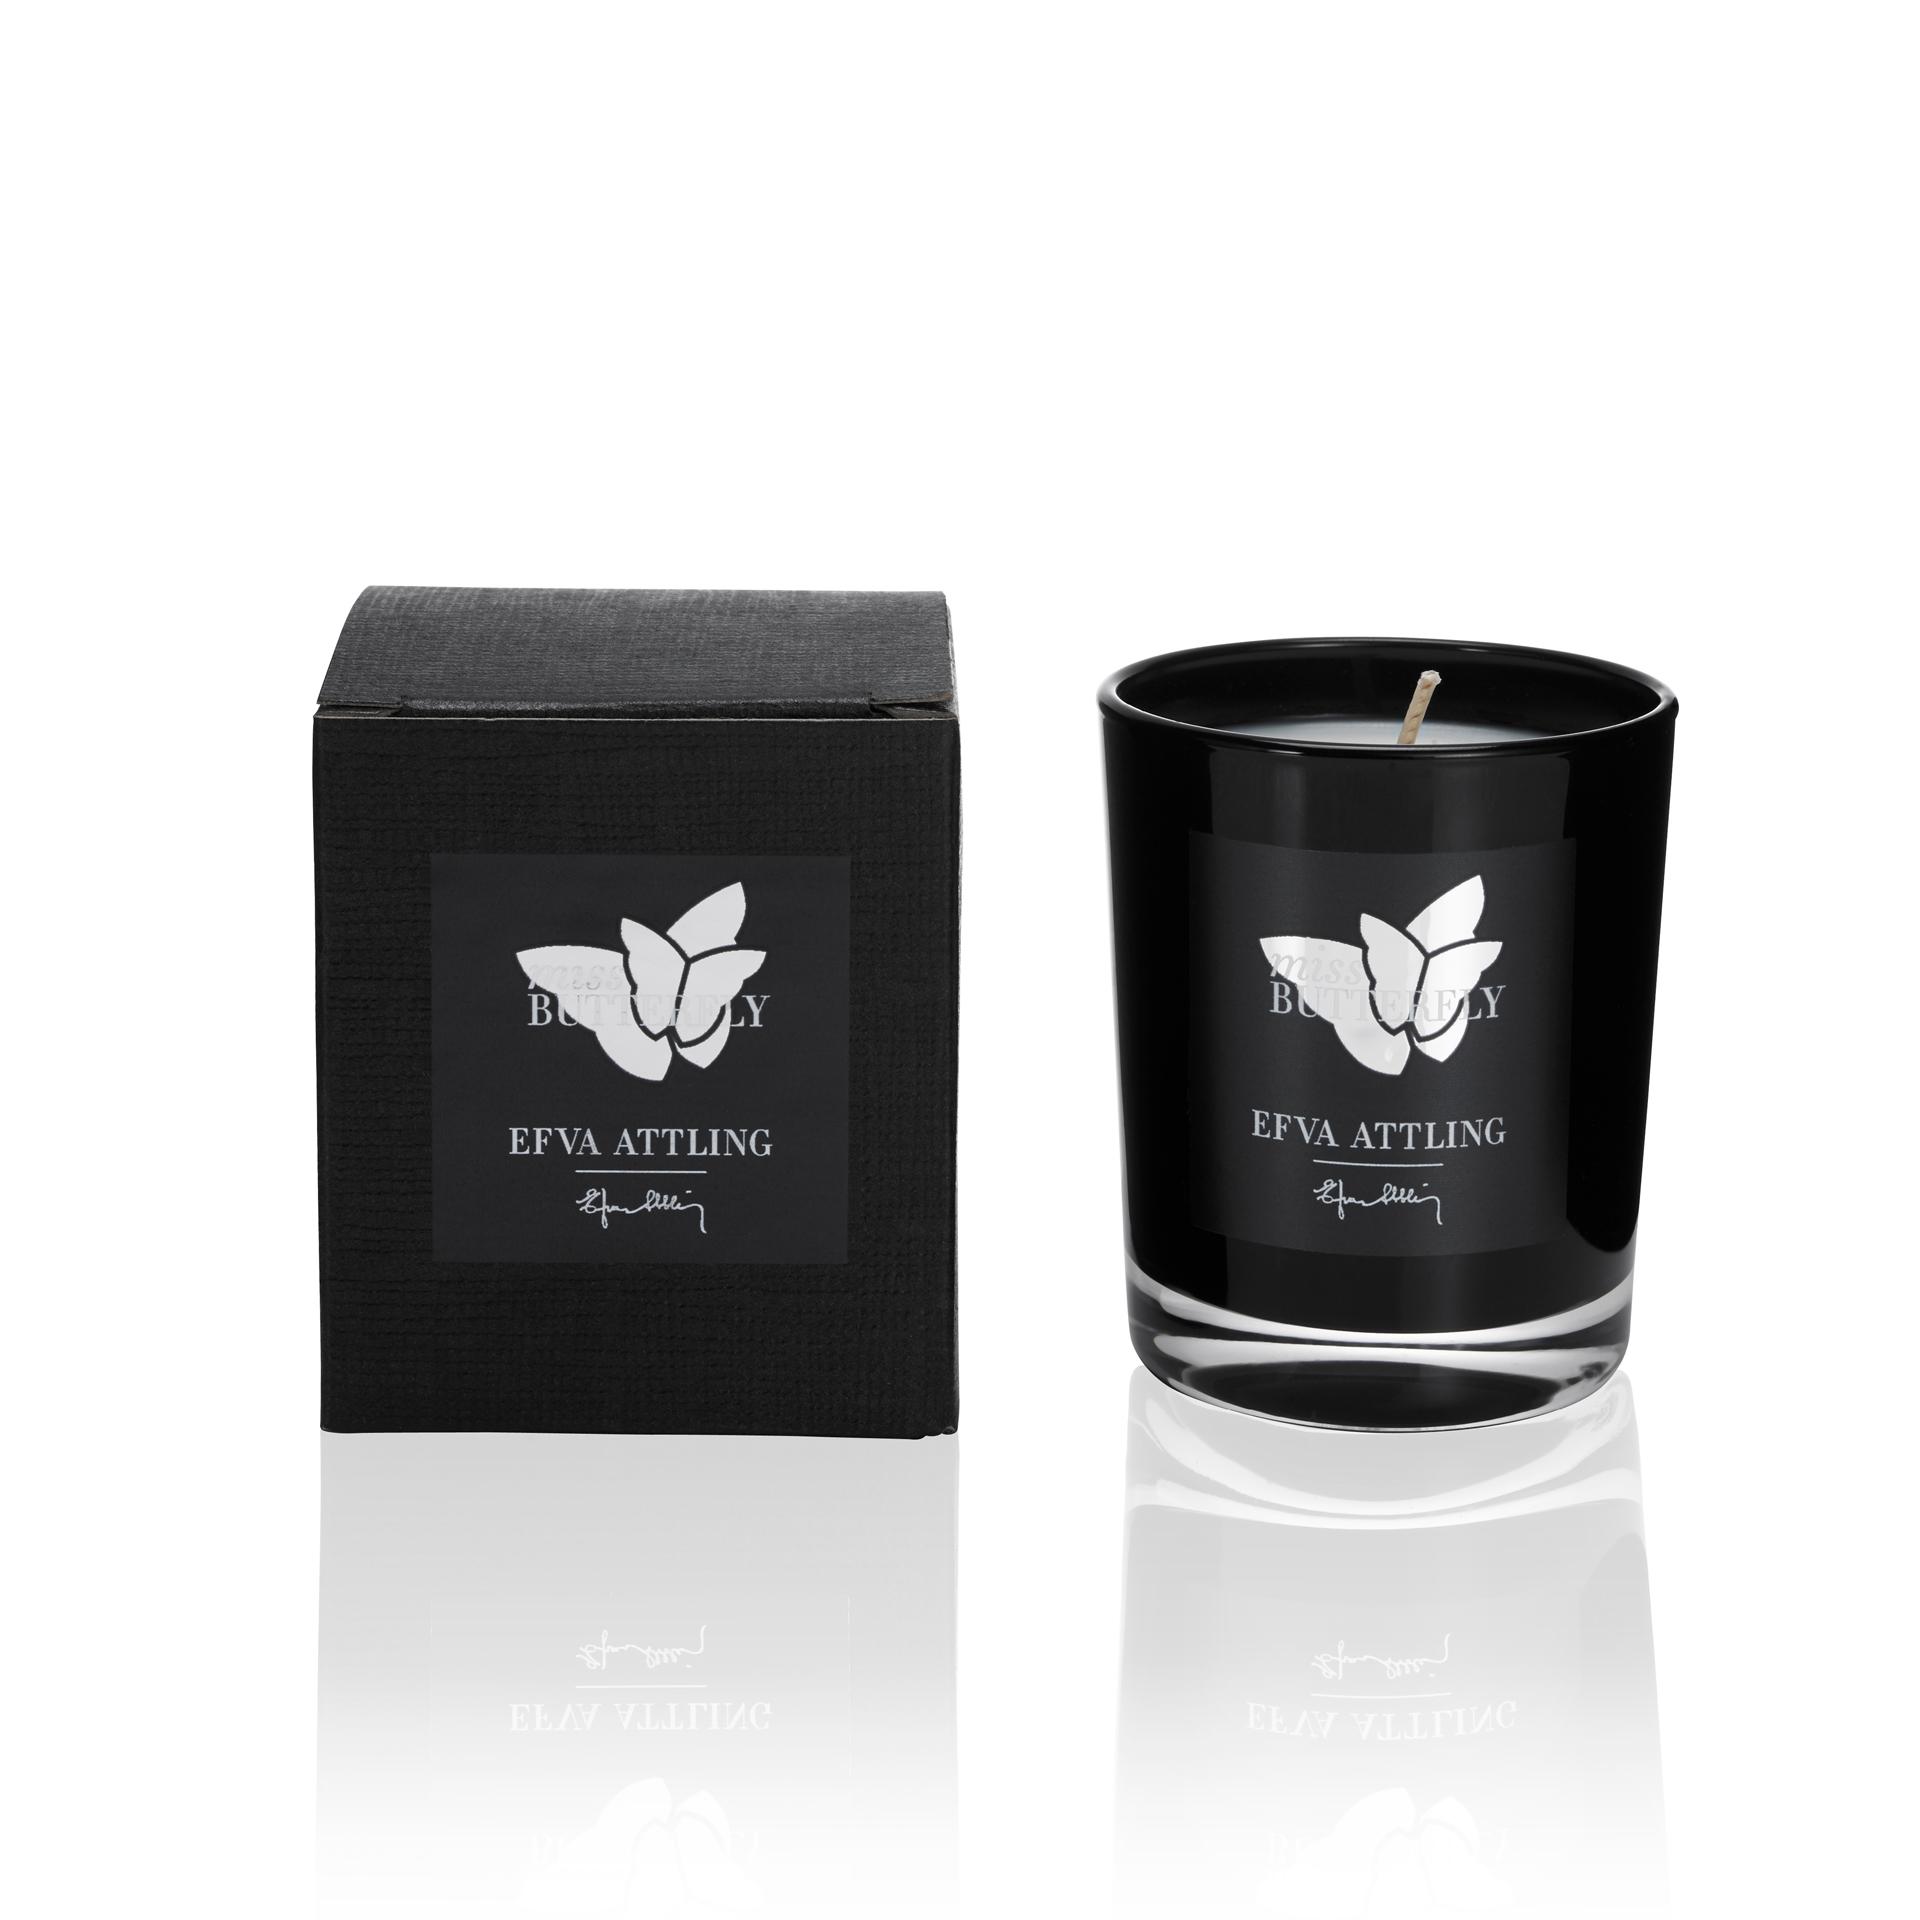 SCENTED CANDLE MINI - MISS BUTTERFLY.